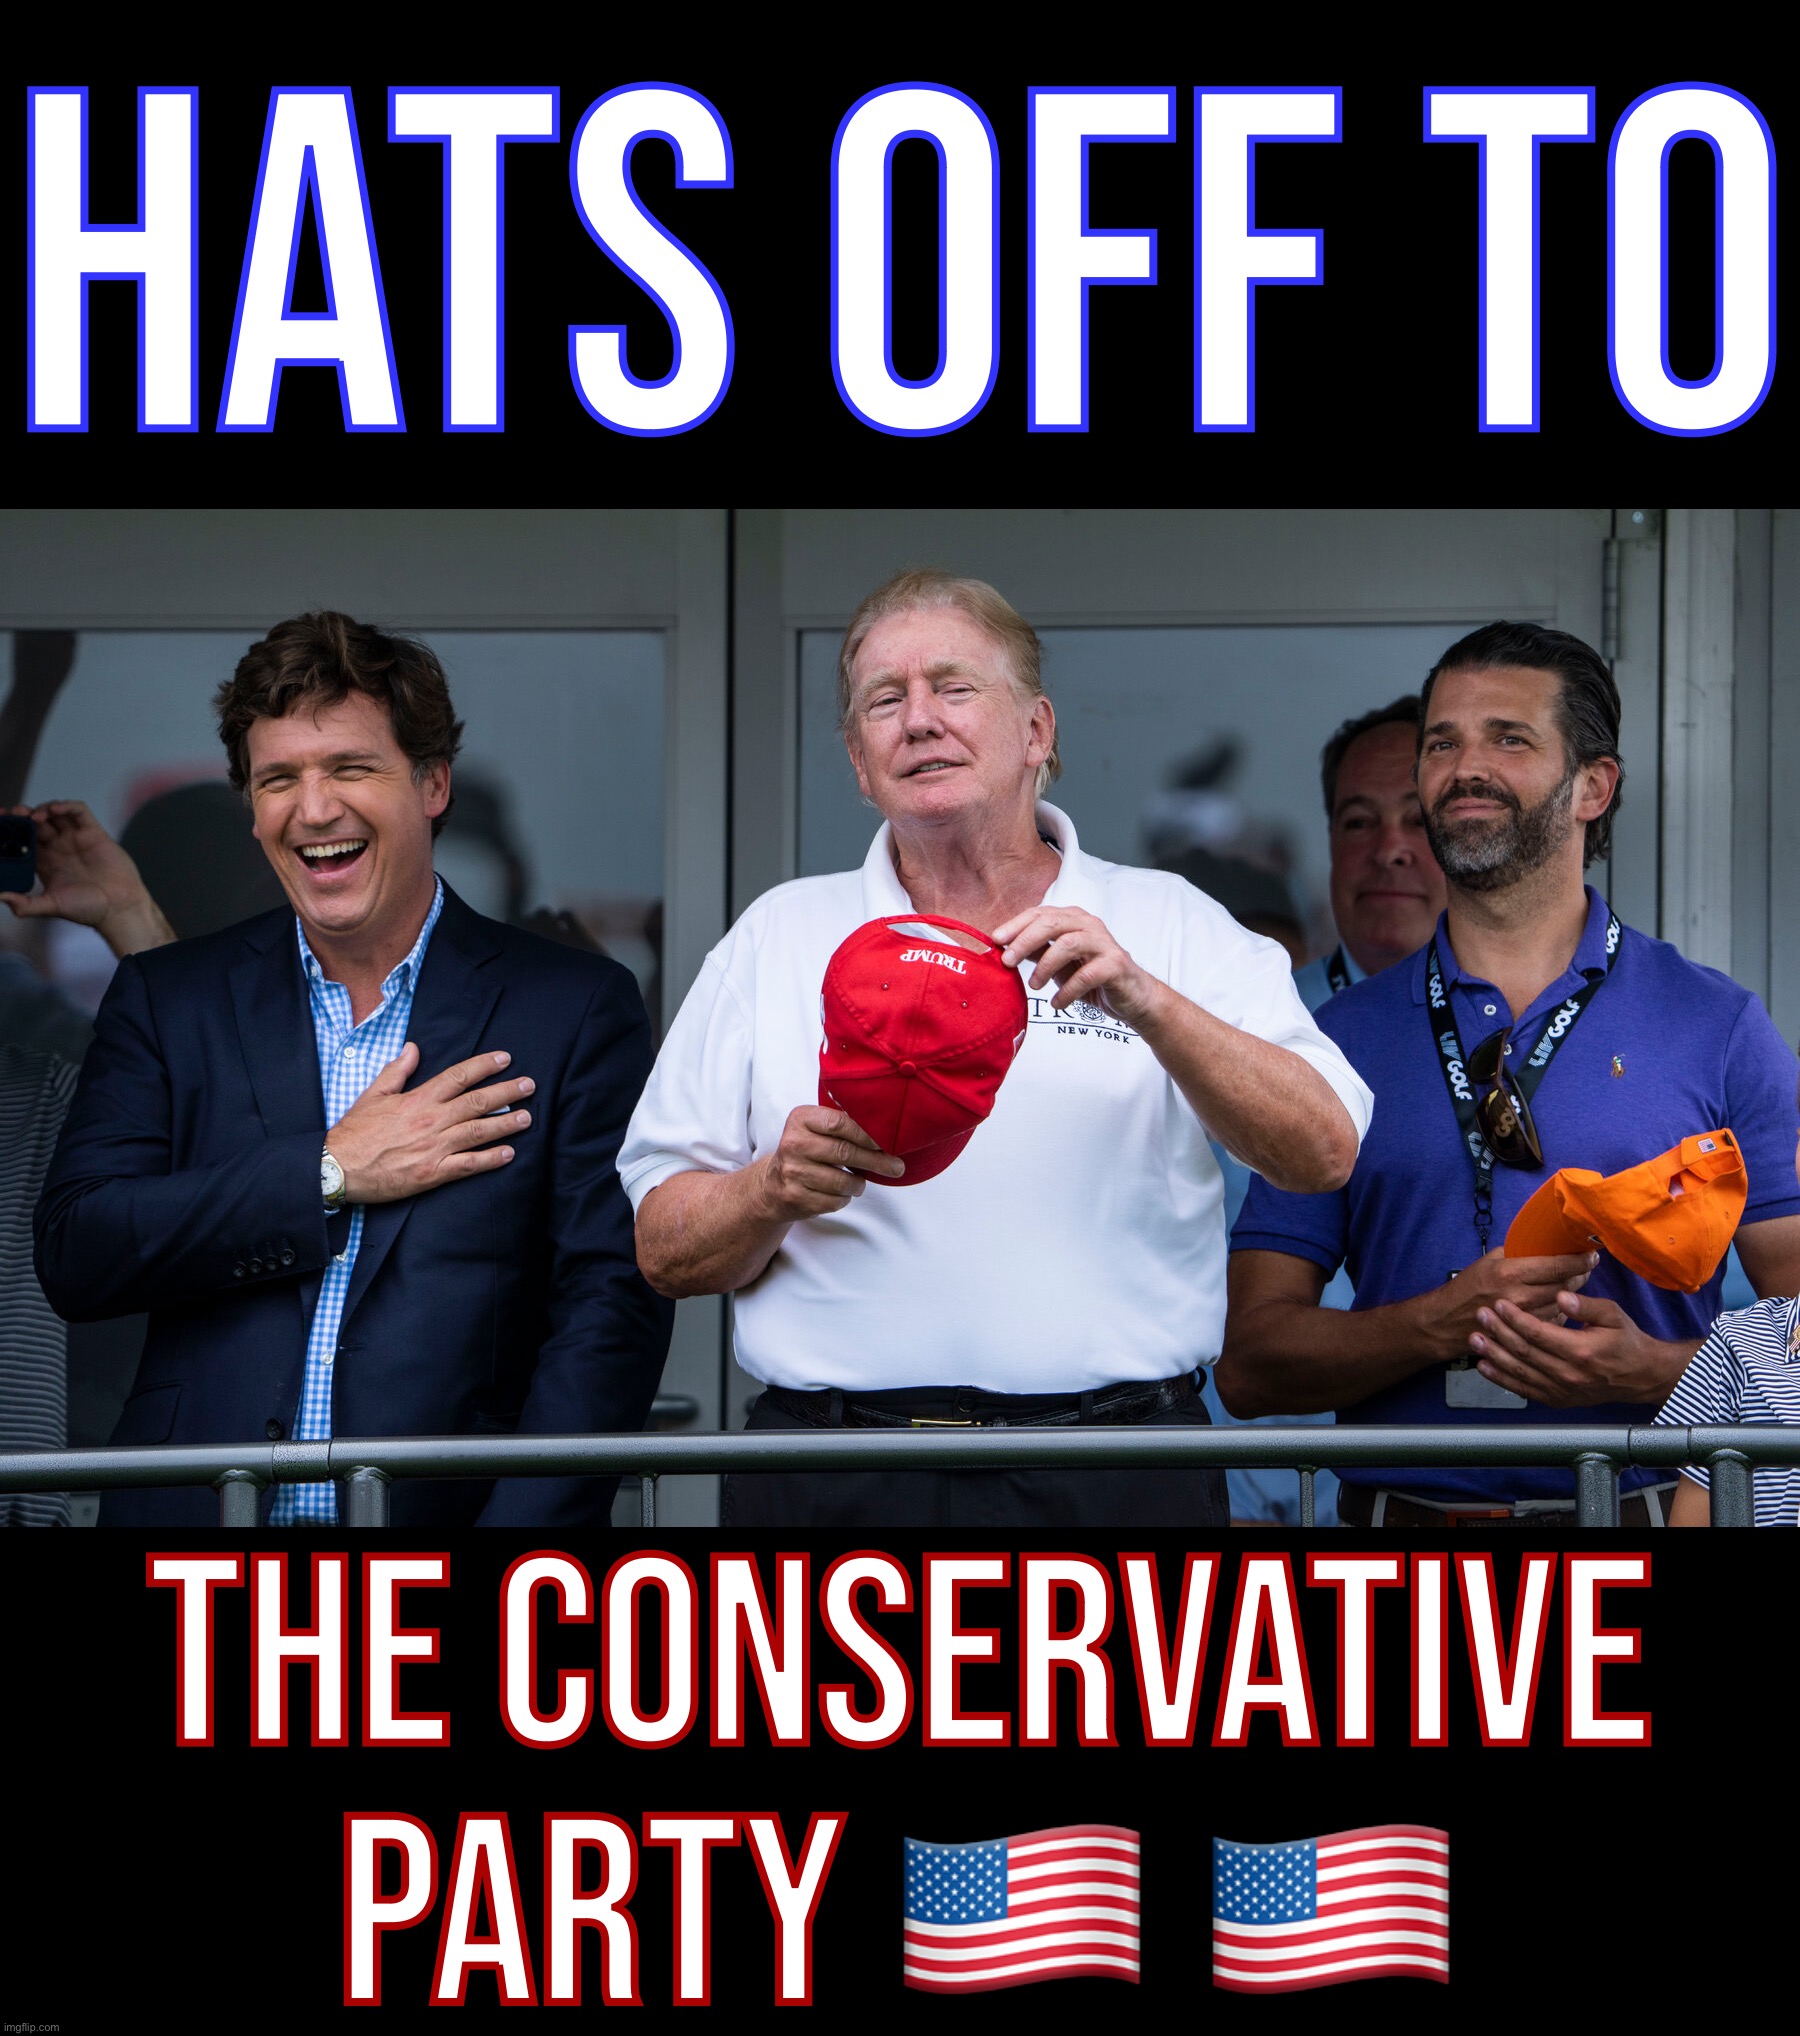 Conservative Party pulls off a hat trick of late-breaking endorsements! Thanks guys! #heavyhitters #slomentum | HATS OFF TO; THE CONSERVATIVE PARTY 🇺🇸 🇺🇸 | image tagged in tucker carlson donald trump and djt jr,conservative party,endorsements,tucker carlson,donald trump,donald trump jr | made w/ Imgflip meme maker